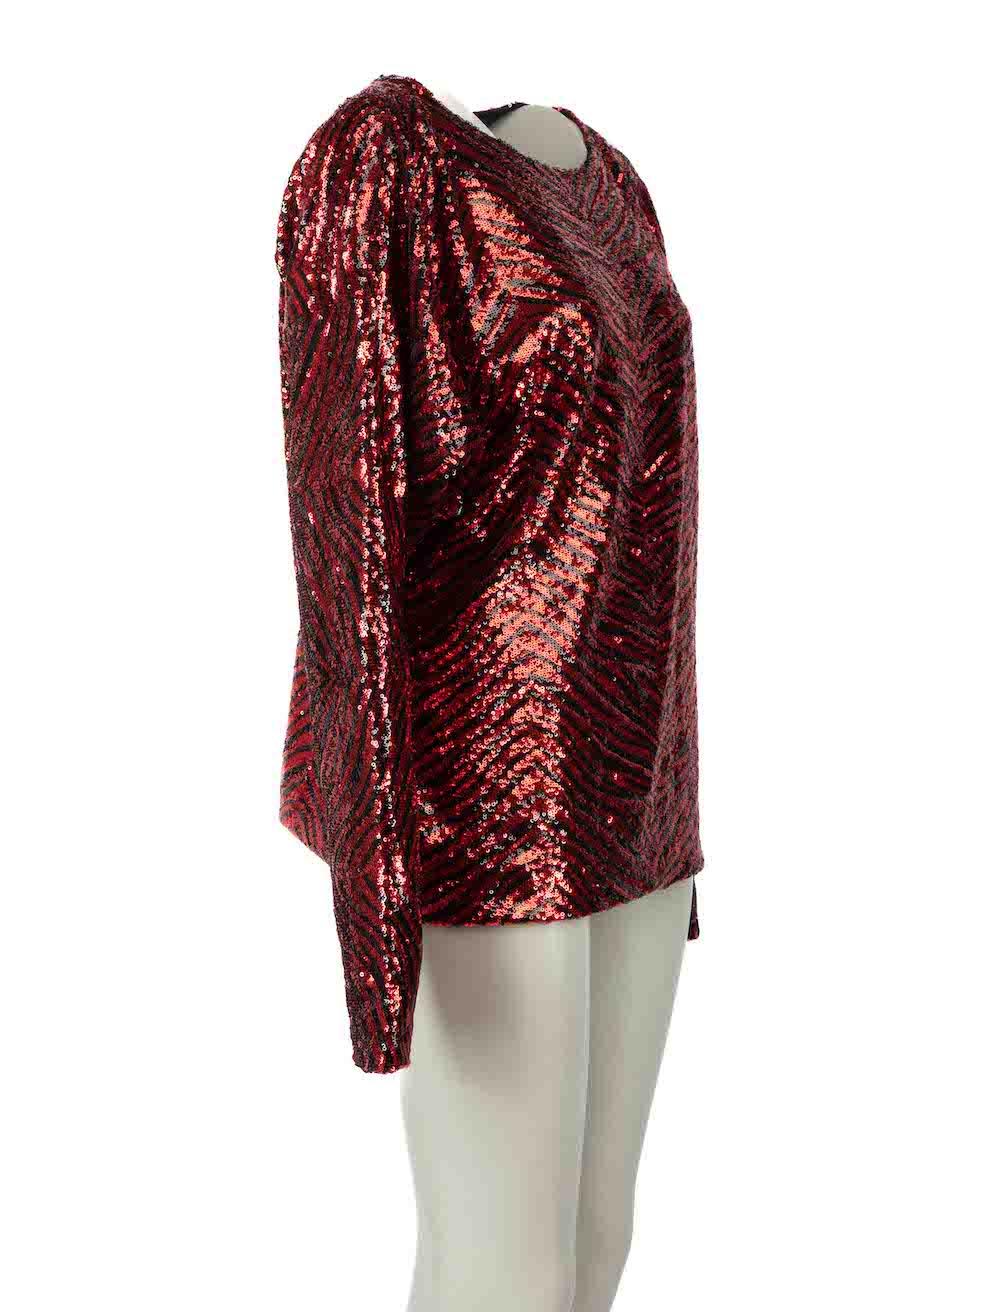 CONDITION is Very good. Hardly any visible wear to top is evident on this used Alexandre Vauthier designer resale item.

Details
Red
Polyester
Sequin top
Tiger pattern
Long sleeves
Round neck

Made in France 

Composition
100% Polyester

Care